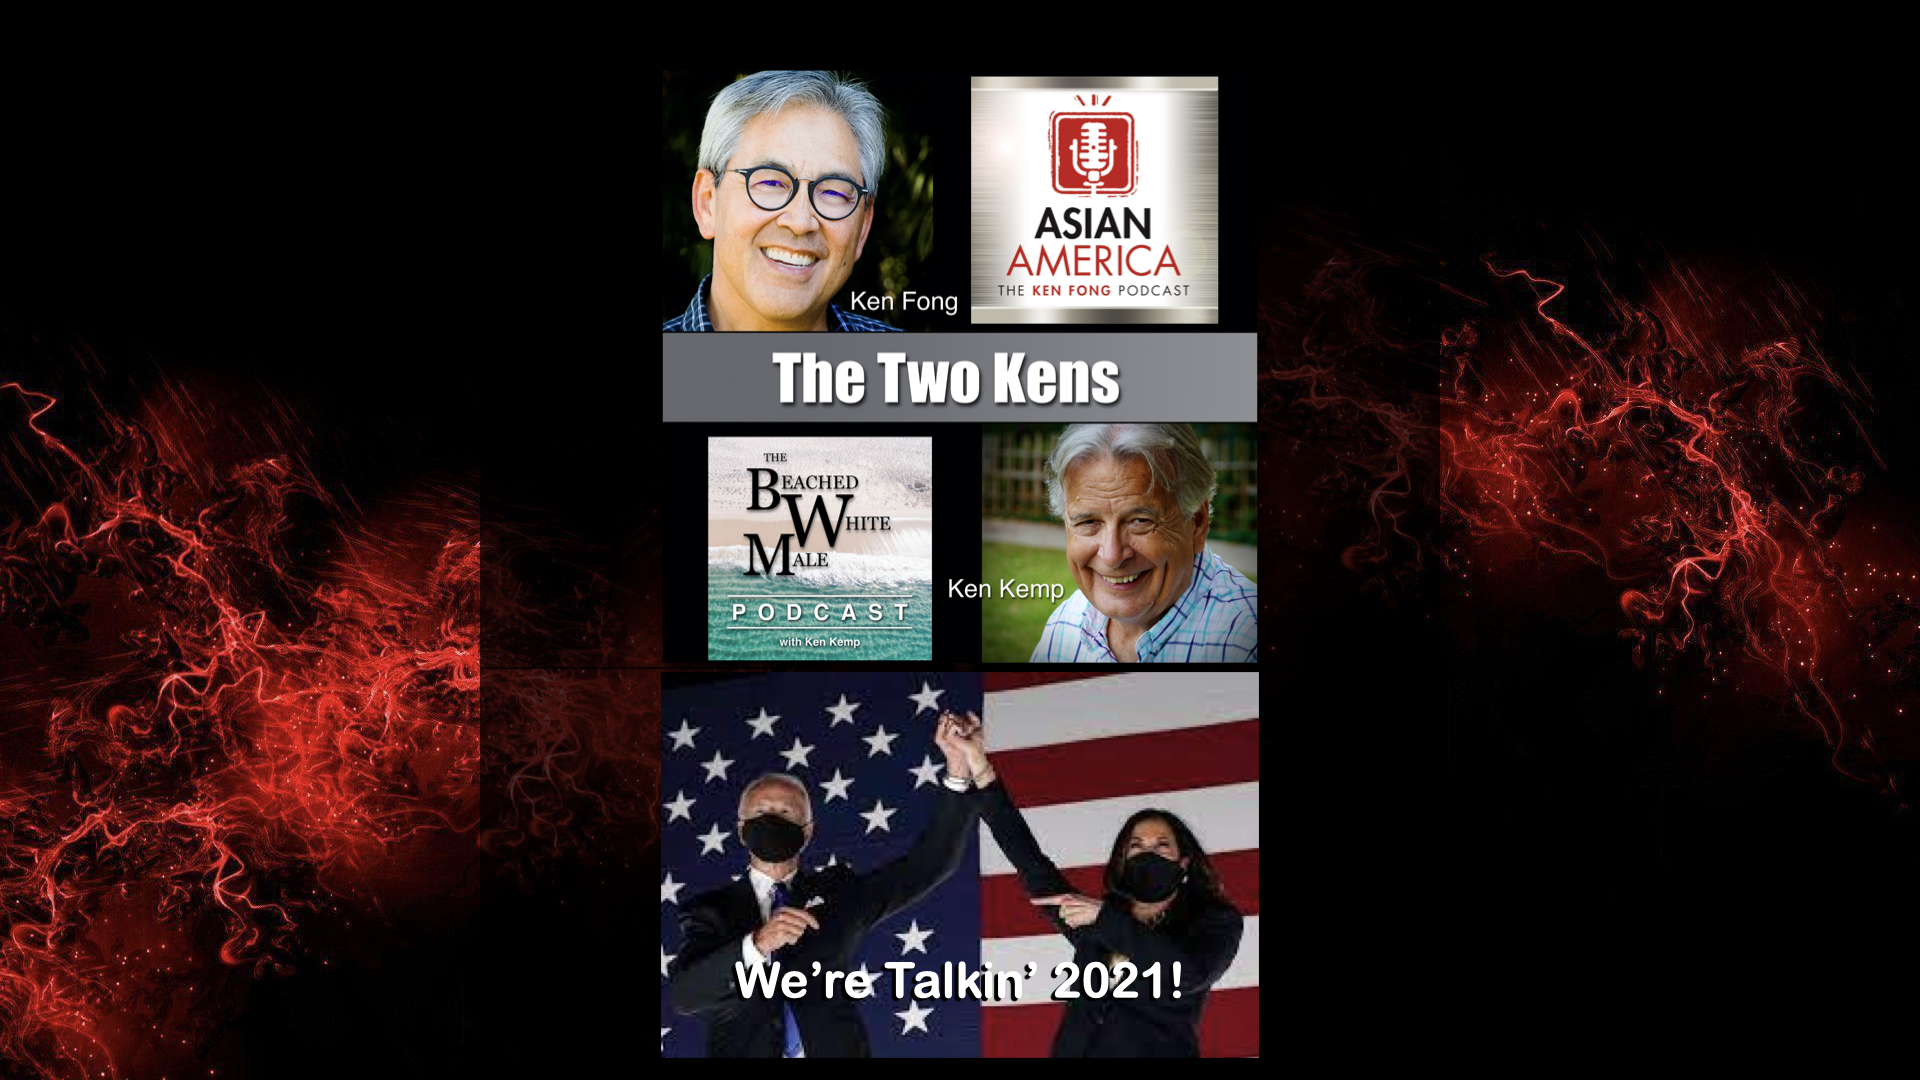 Ep 269: The Two Ken’s: The Exhilaration of Waking Up to the End of Trump’s Administration and the Beginning of Biden’s